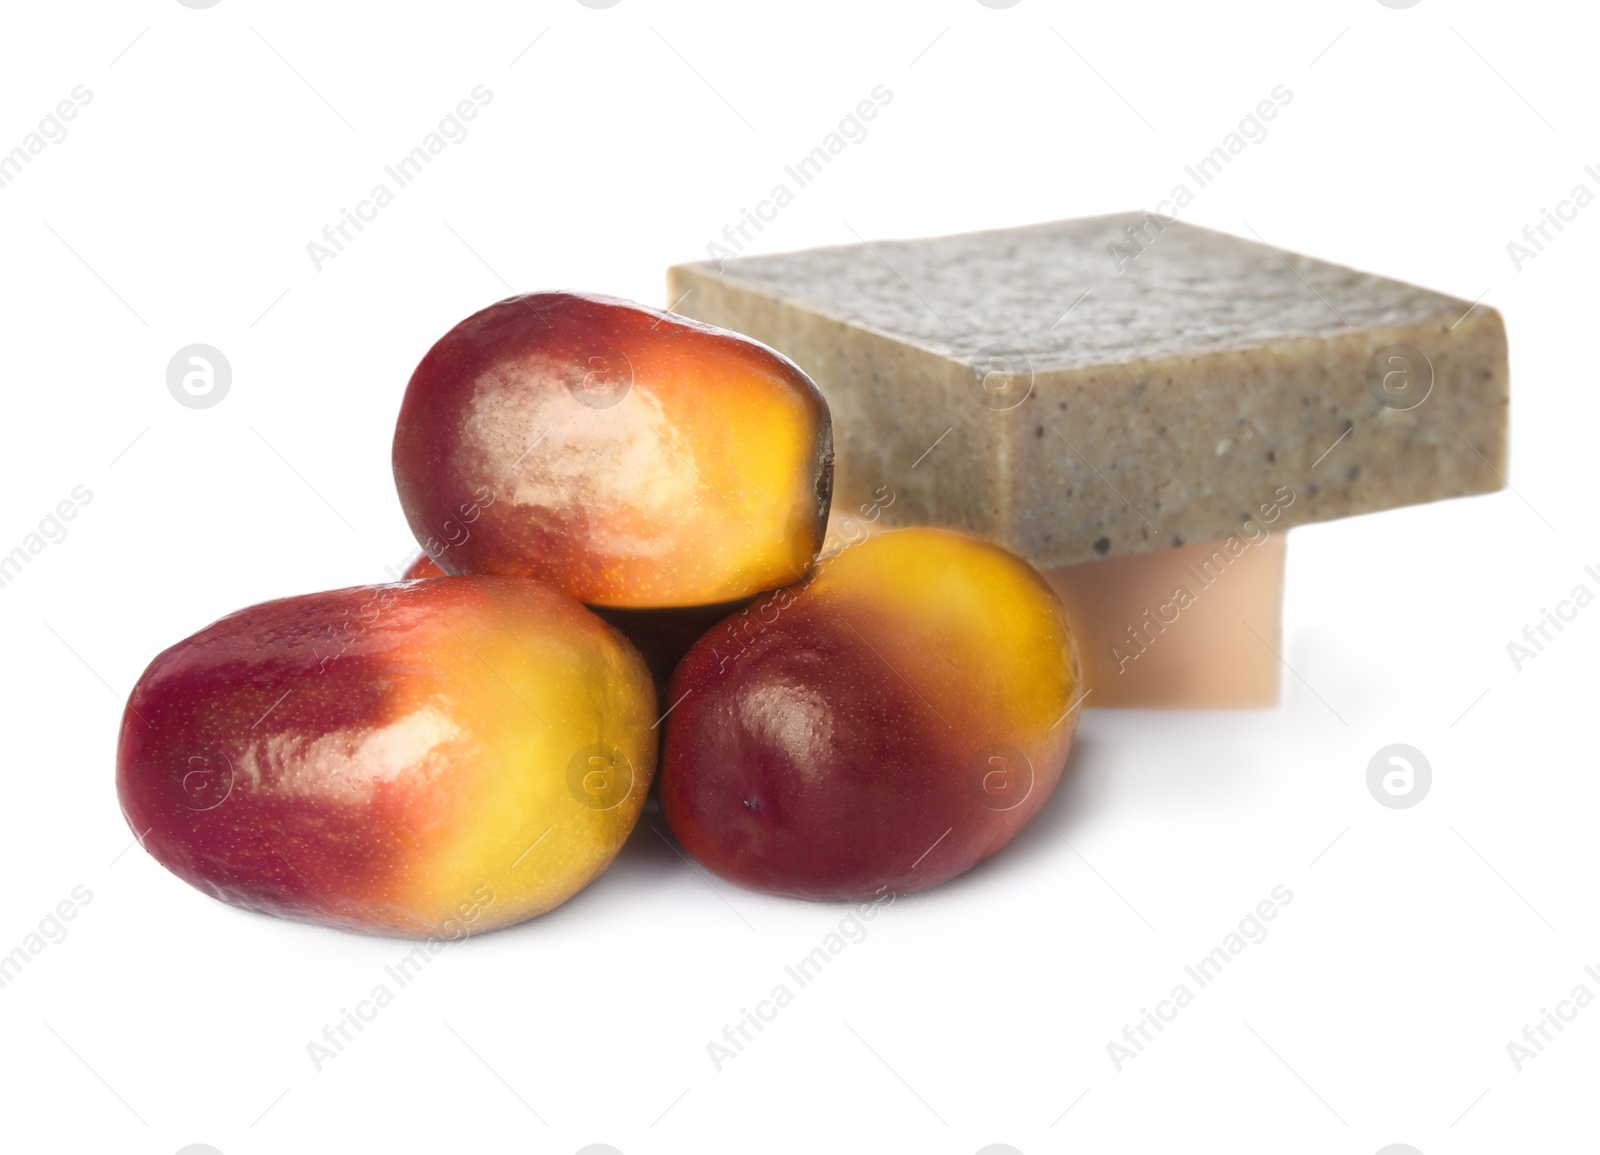 Image of Fresh ripe palm oil fruits and soap bars on white background